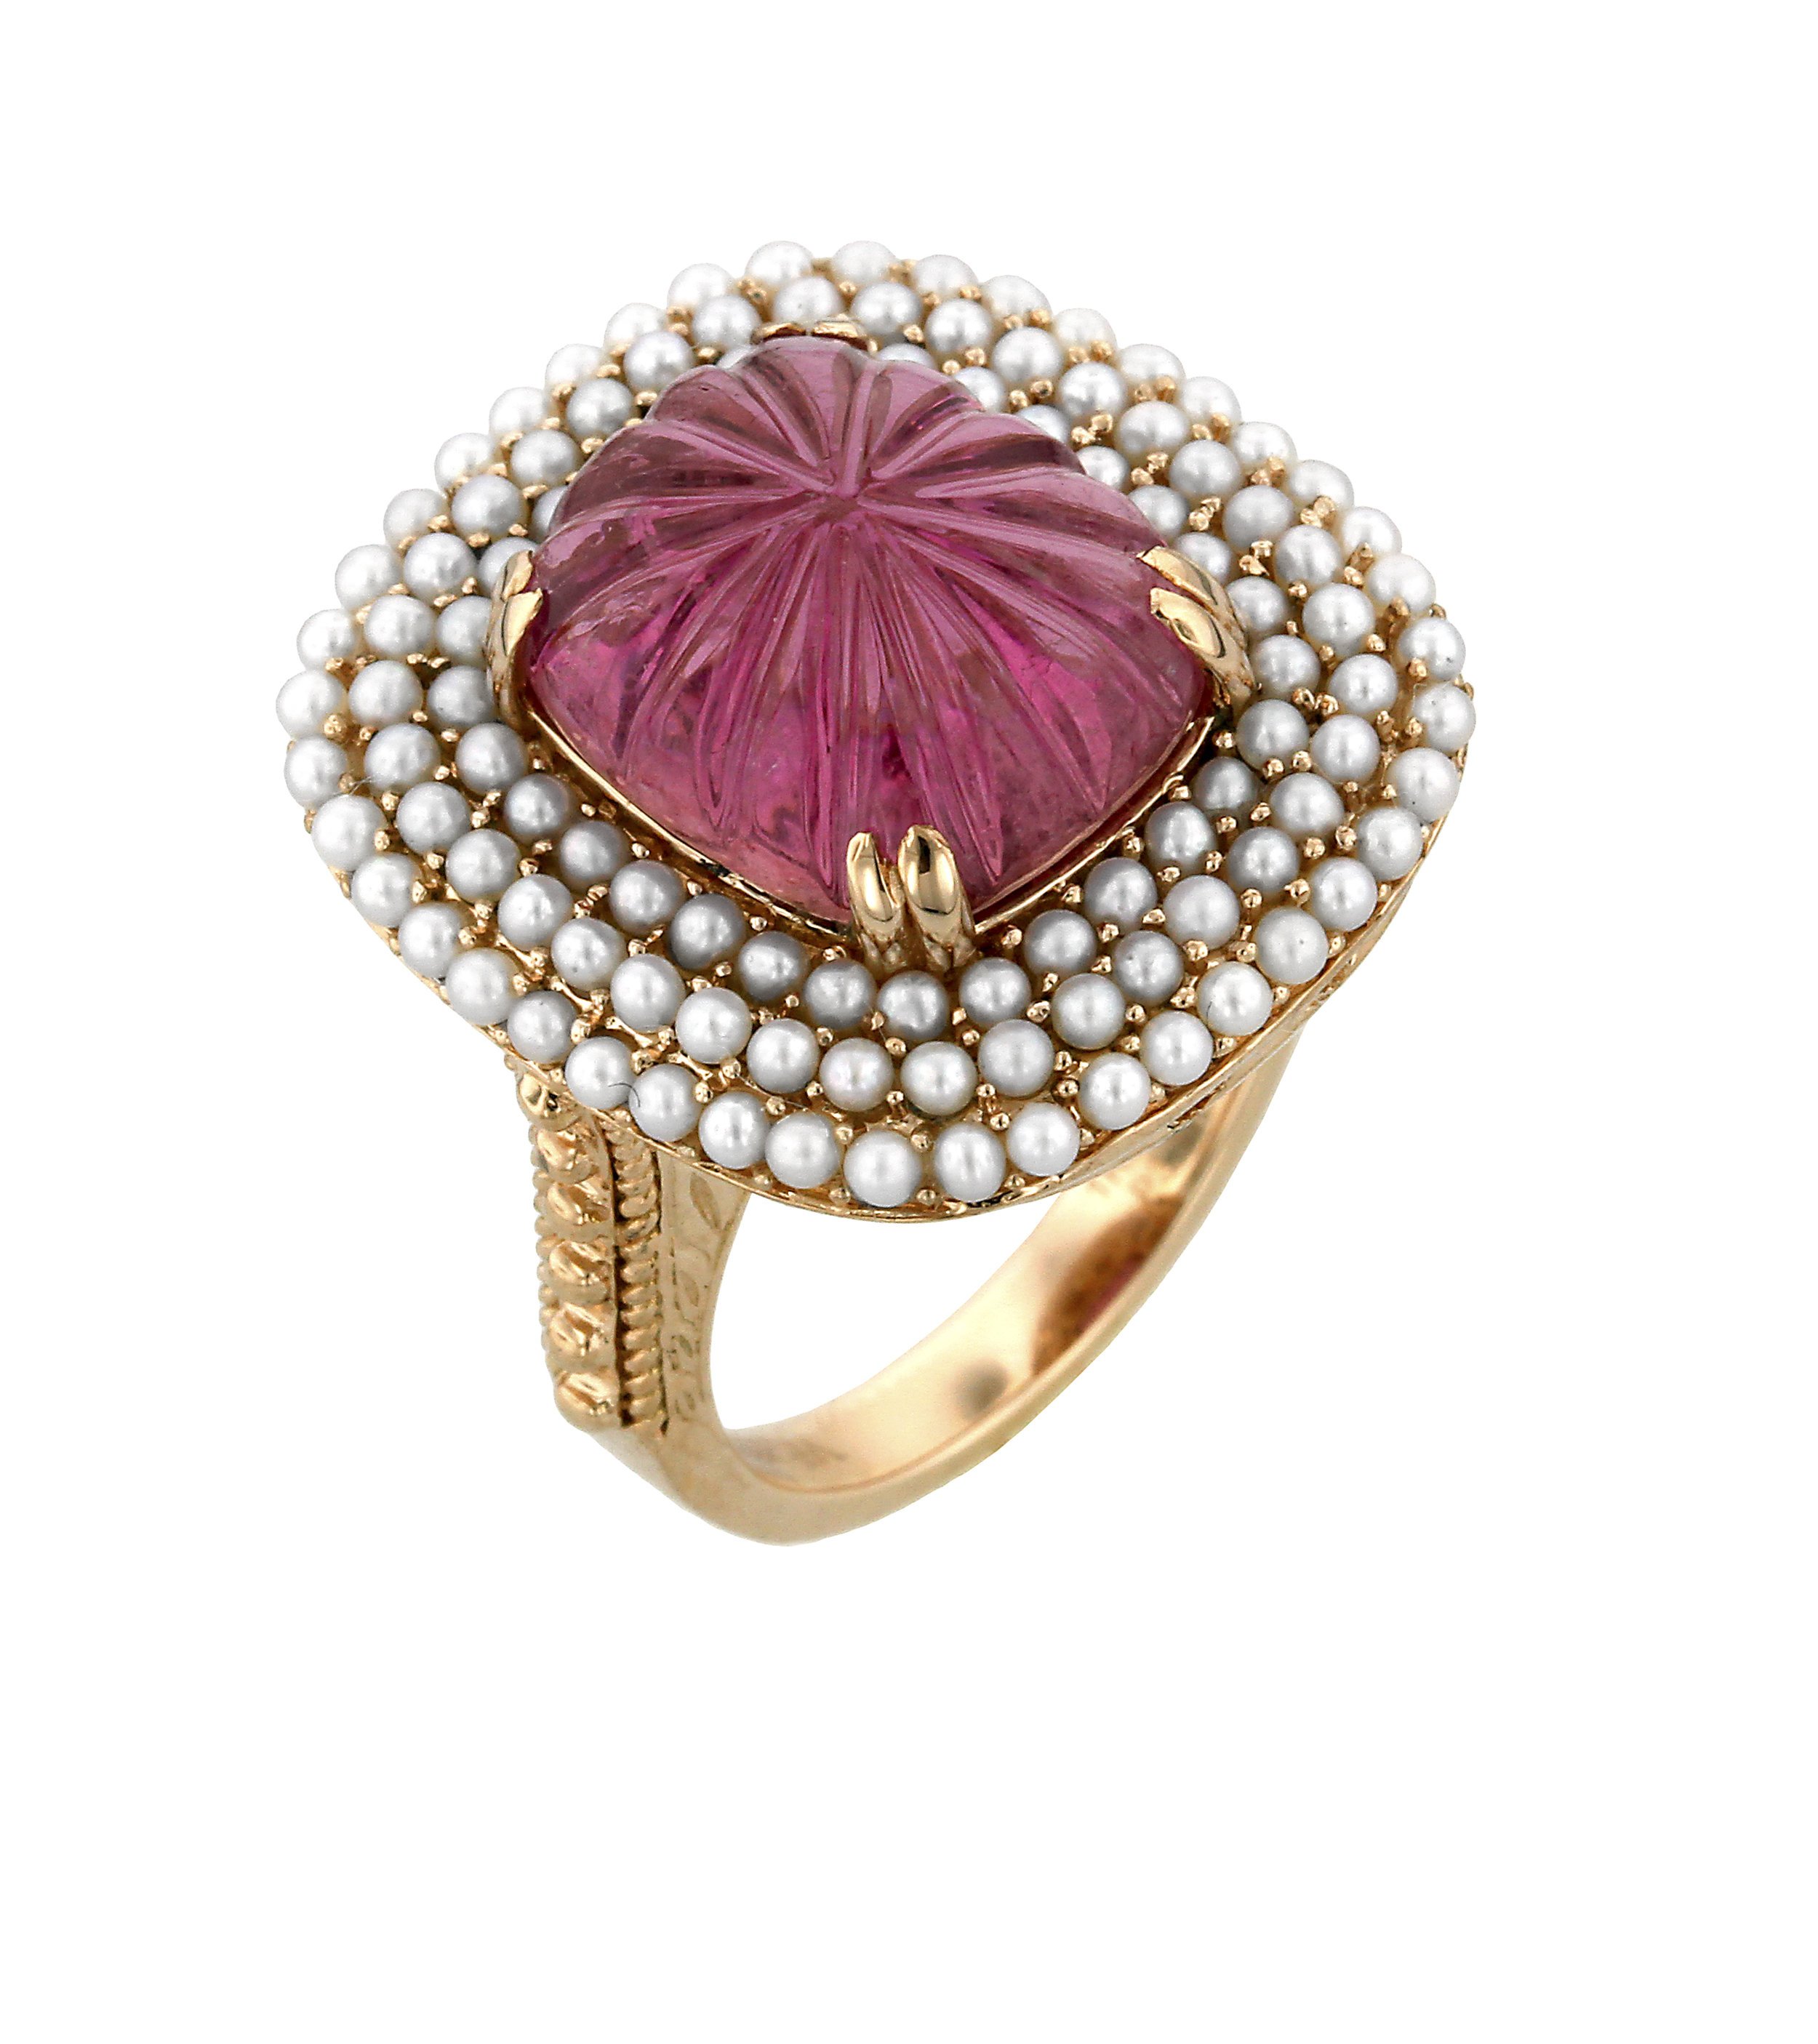 Carved+Tourmaline+and+Pearl+Ring.jpg